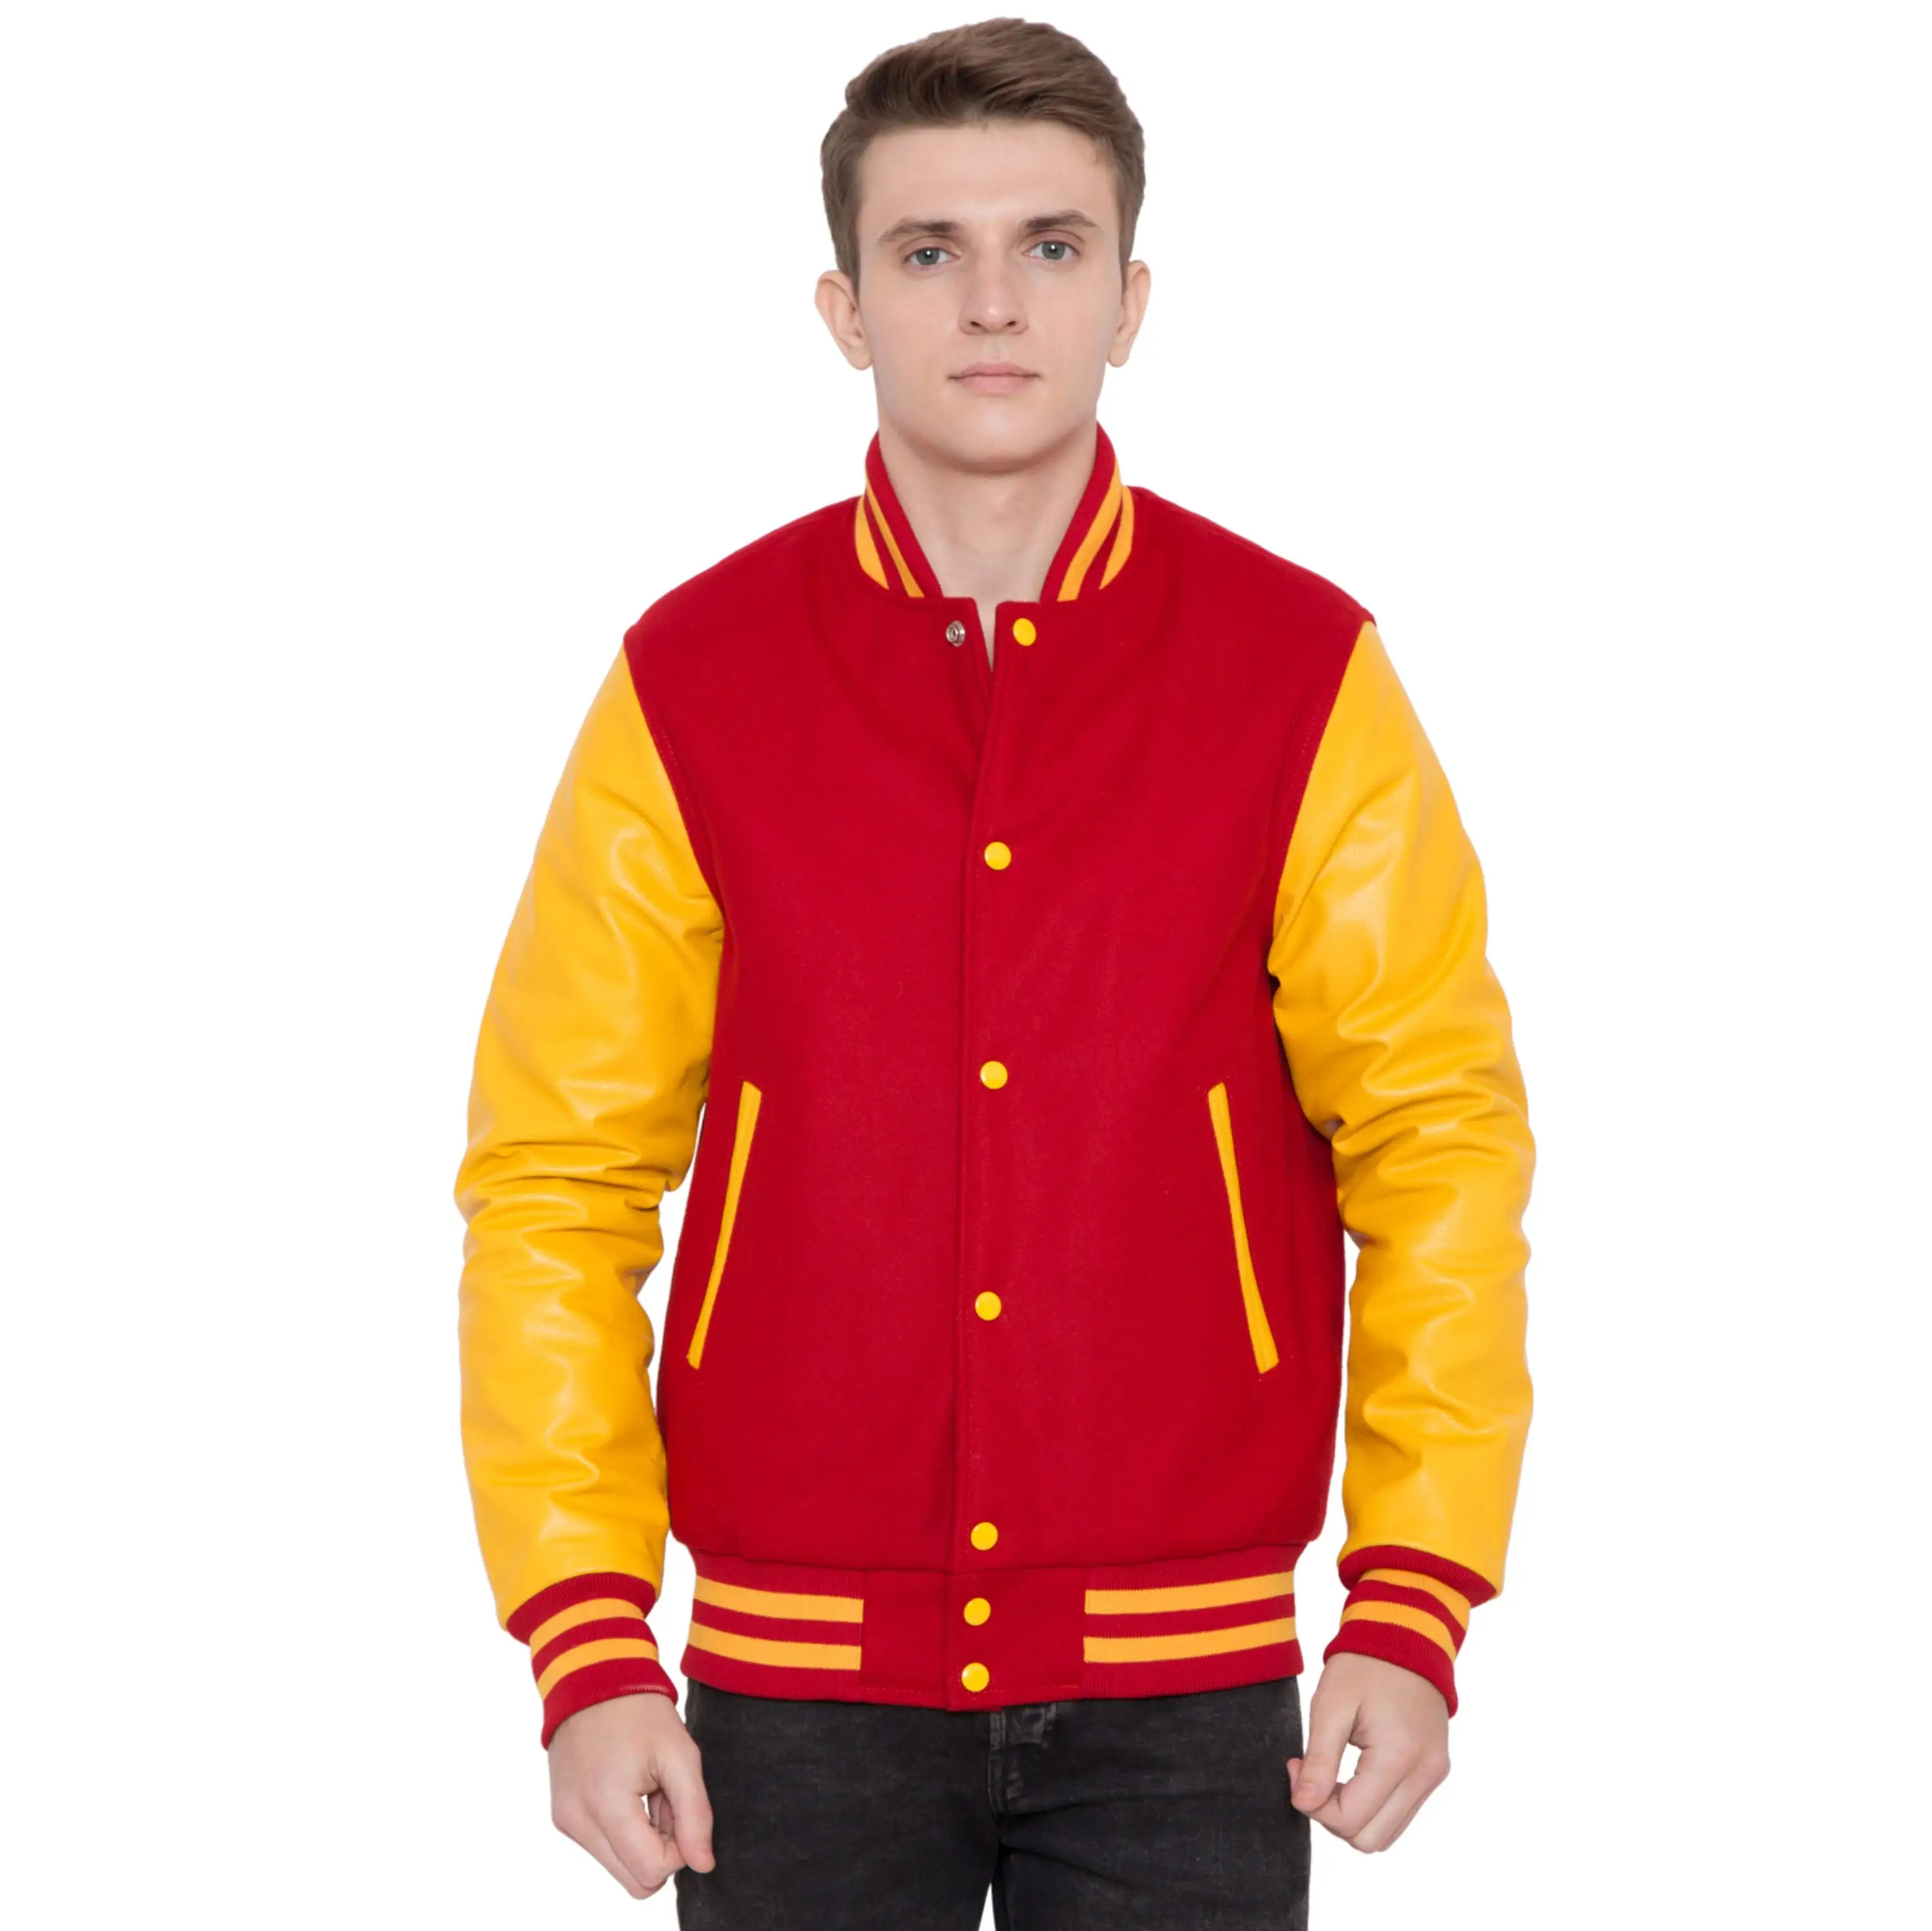 100% Cashmere Wool Body and Genuine Cowhide Leather Sleeves Red & Golden Yellow Letterman Varsity Jacket